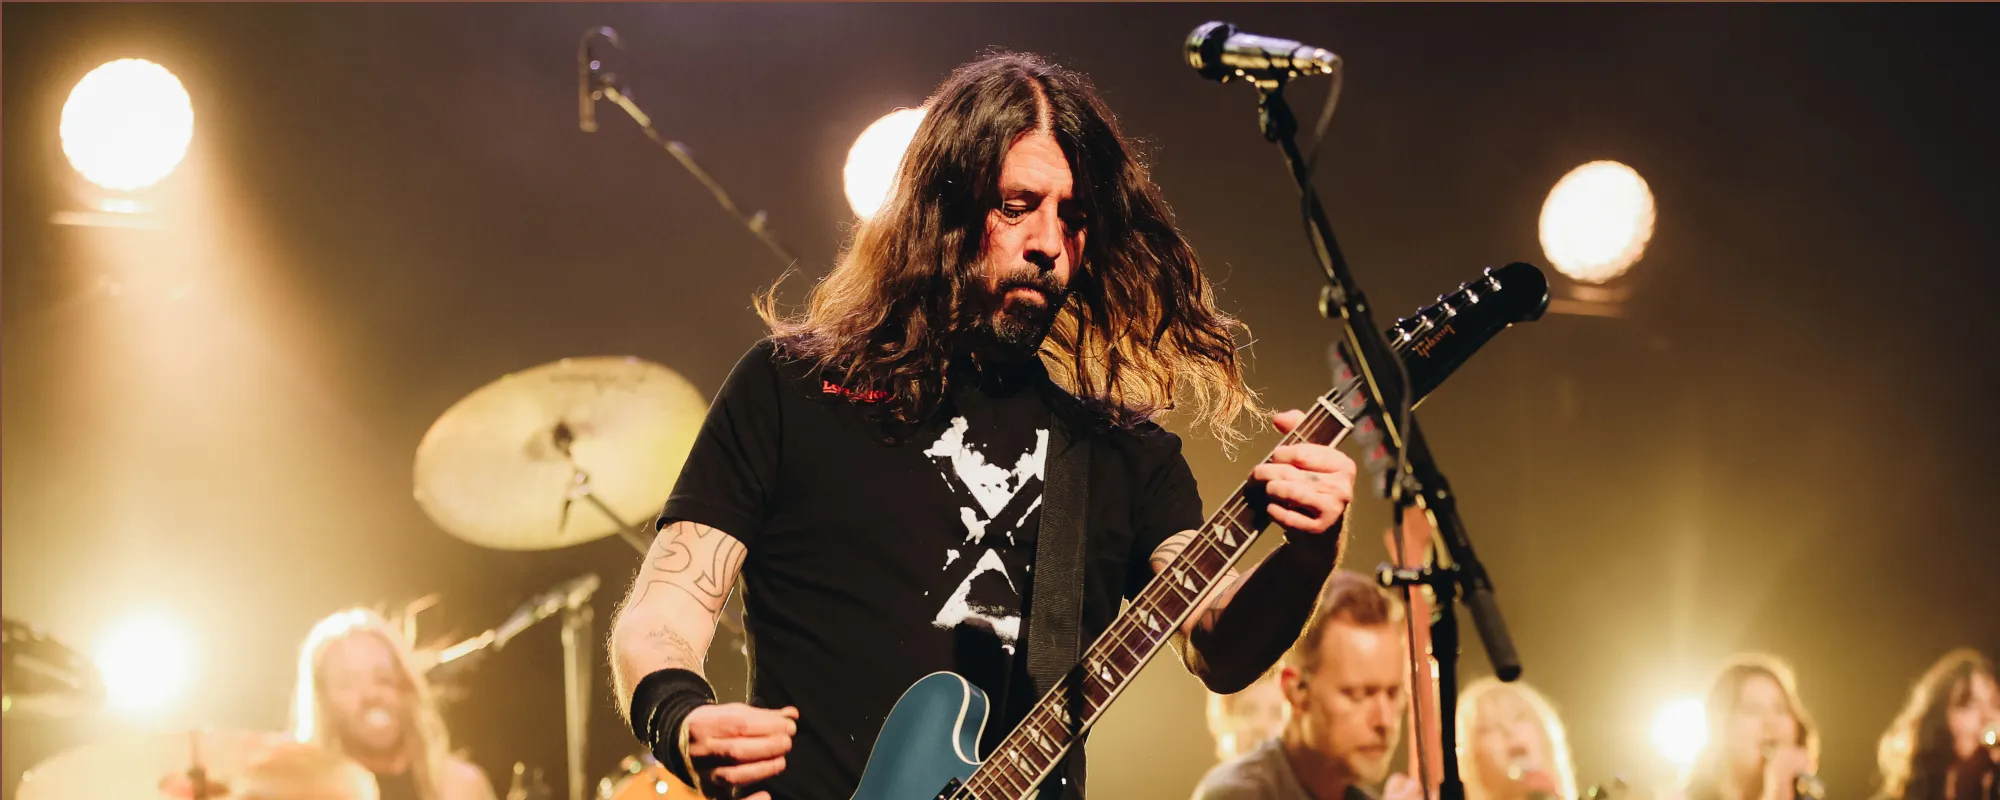 Foo Fighters Play First Show with New Drummer Josh Freese